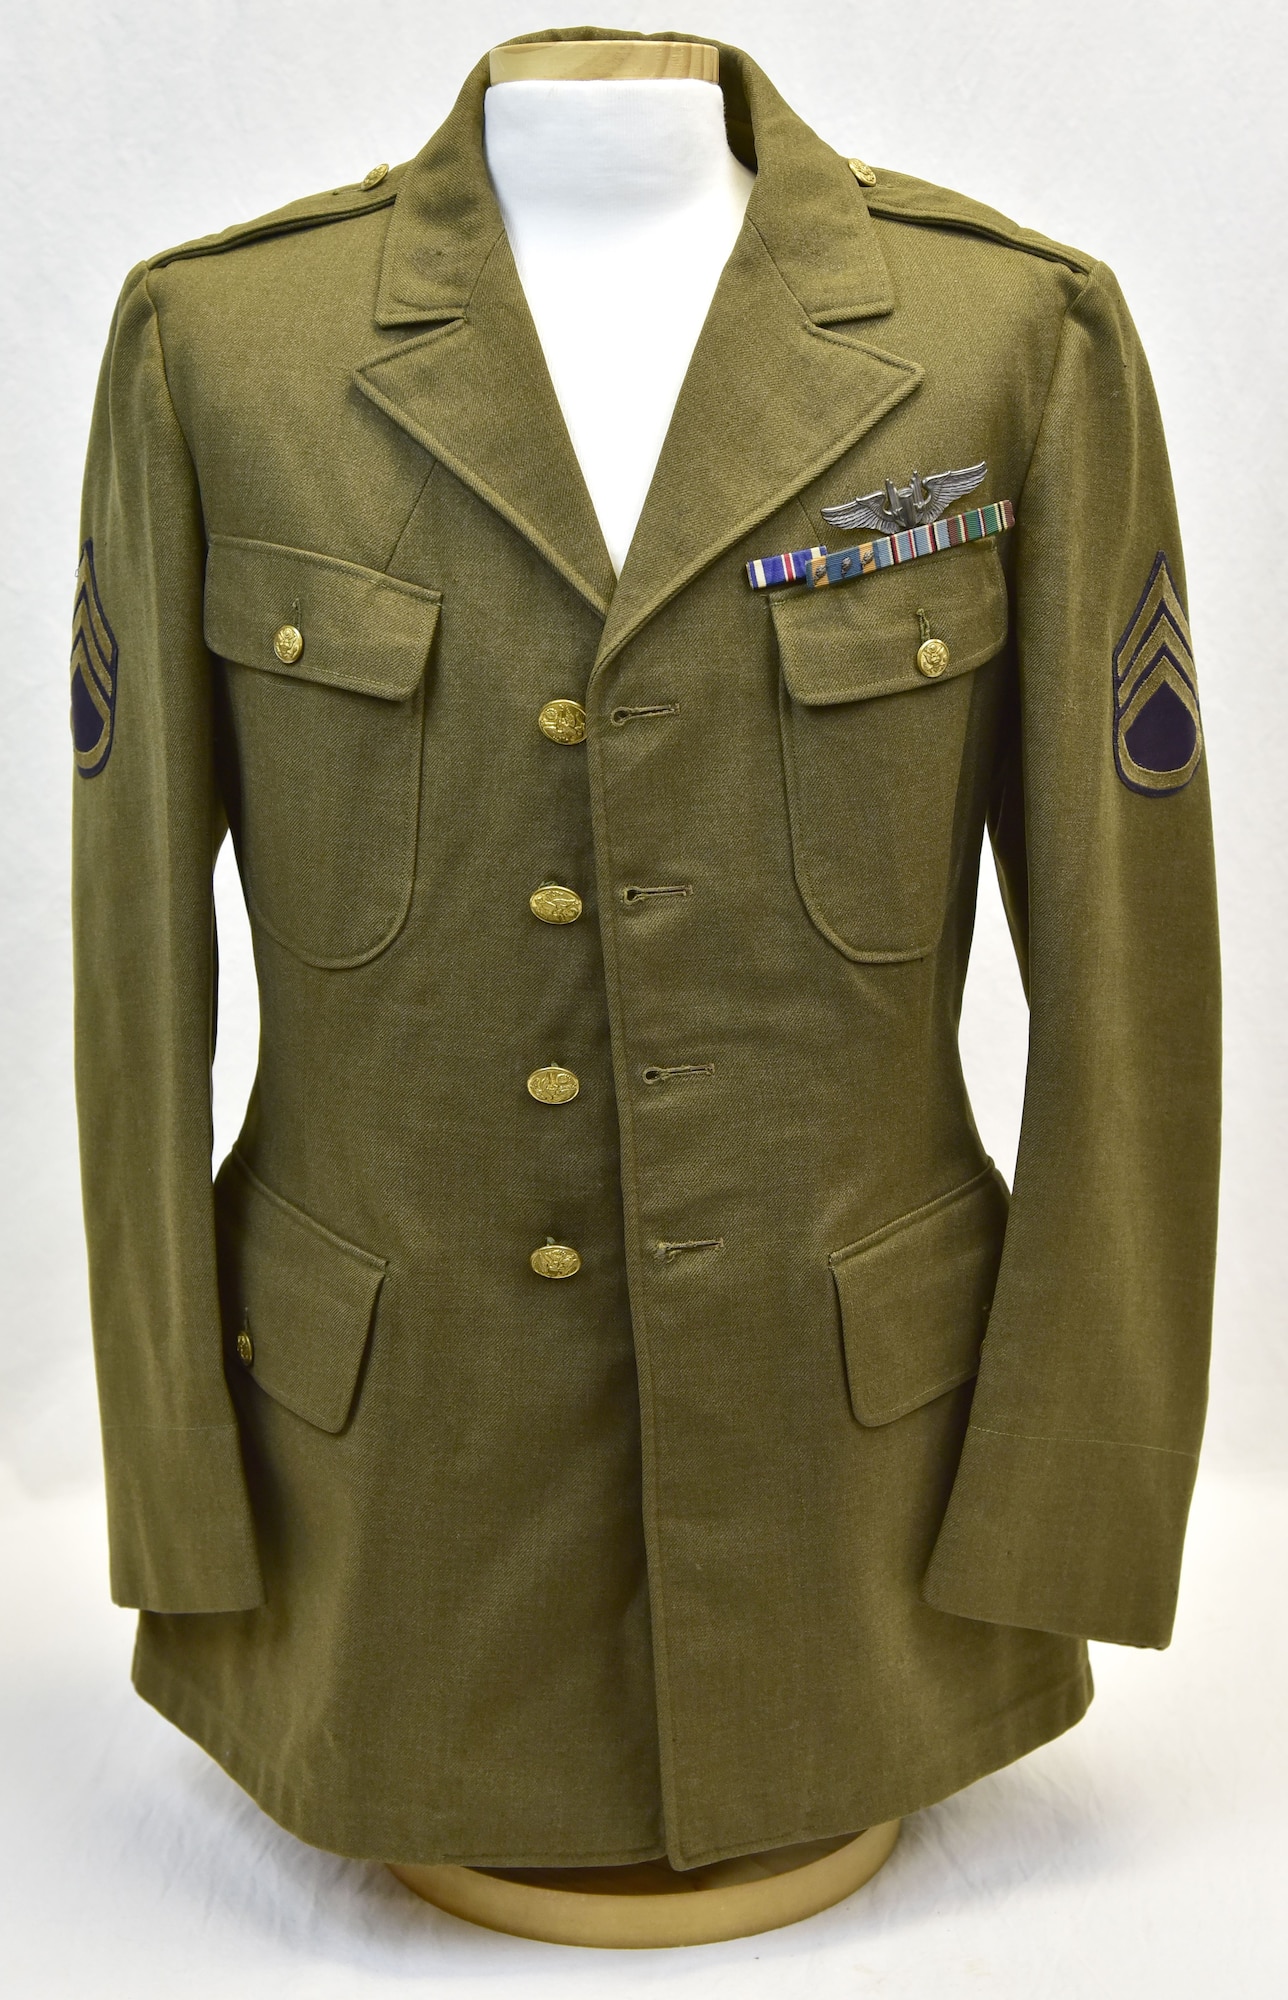 Plans call for this artifact to be displayed near the B-17F Memphis Belle™ as part of the new strategic bombardment exhibit in the WWII Gallery, which opens to the public on May 17, 2018. Memphis Belle waist gunner SSgt E. Scott Miller’s uniform coat. He flew 16 missions with the crew, but did not go on the war bond tour.